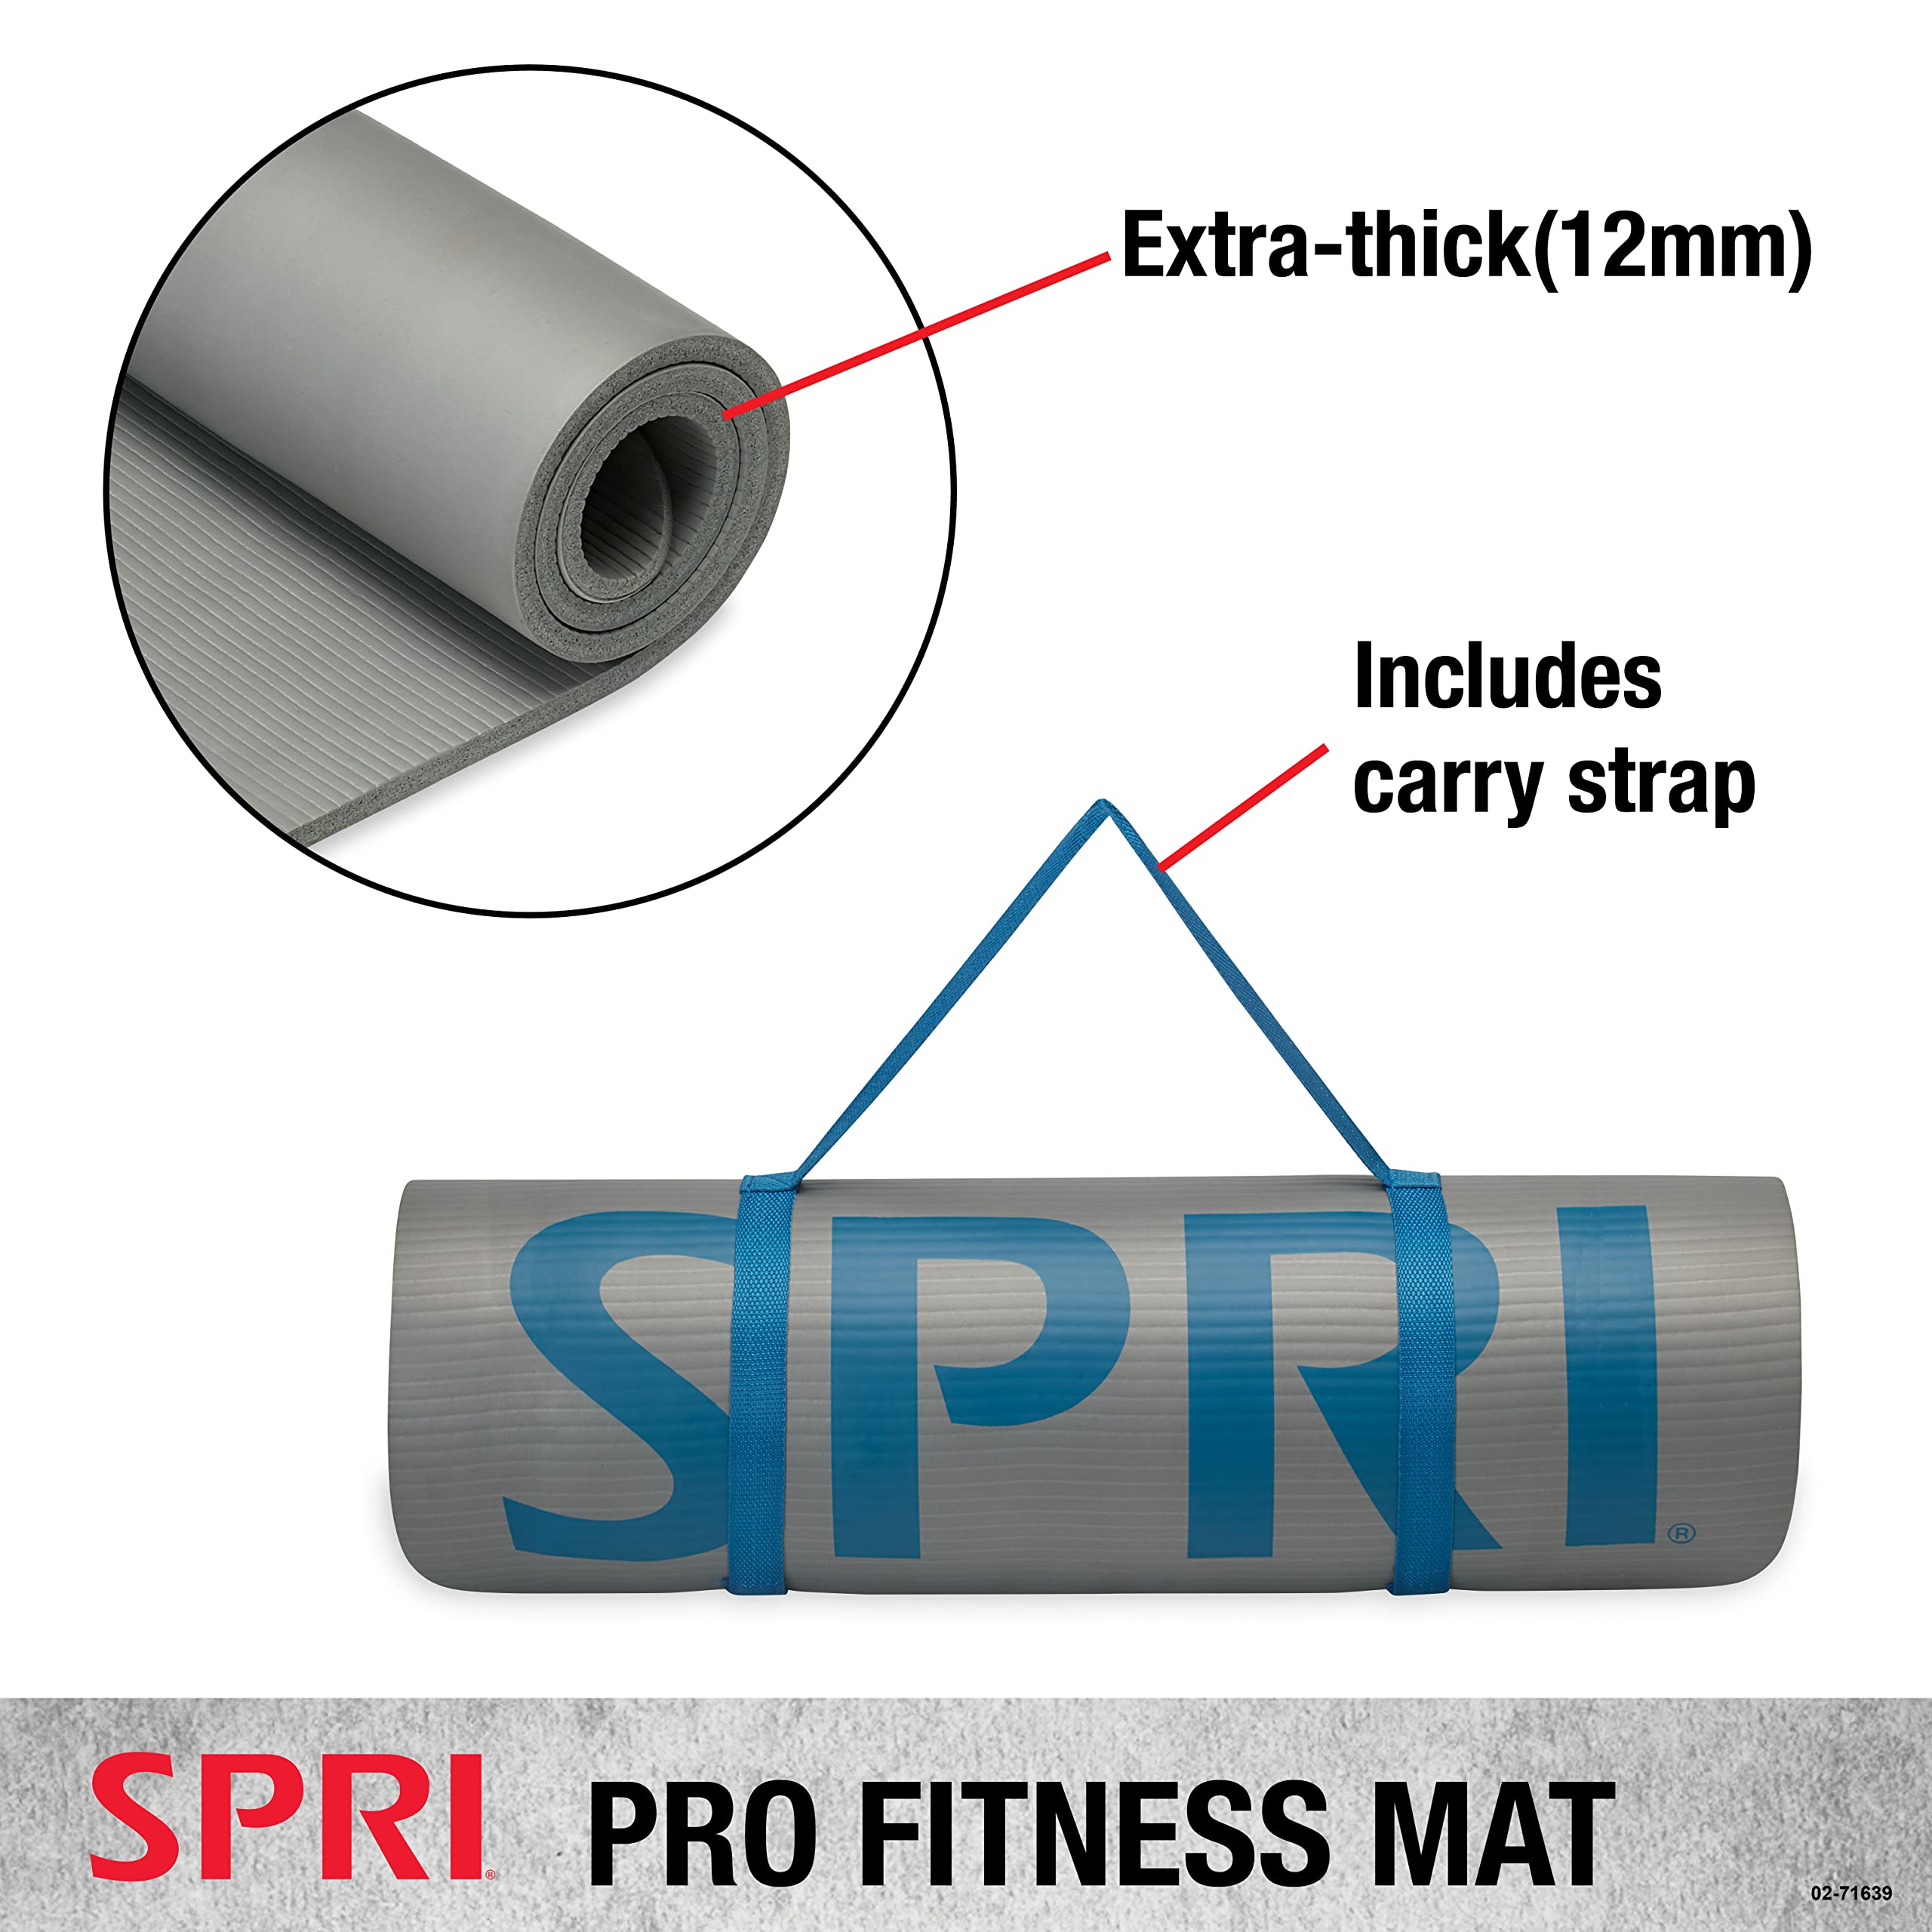 SPRI 12mm Pro Fitness Matt - Thick Exercise Mat for Floor Workouts, Sit-Ups, Push-Ups, Stretching, Toning, and General Fitness - Non-Slip Texture, Cushioned, Portable Rolling Mat with Carrying Strap Grey